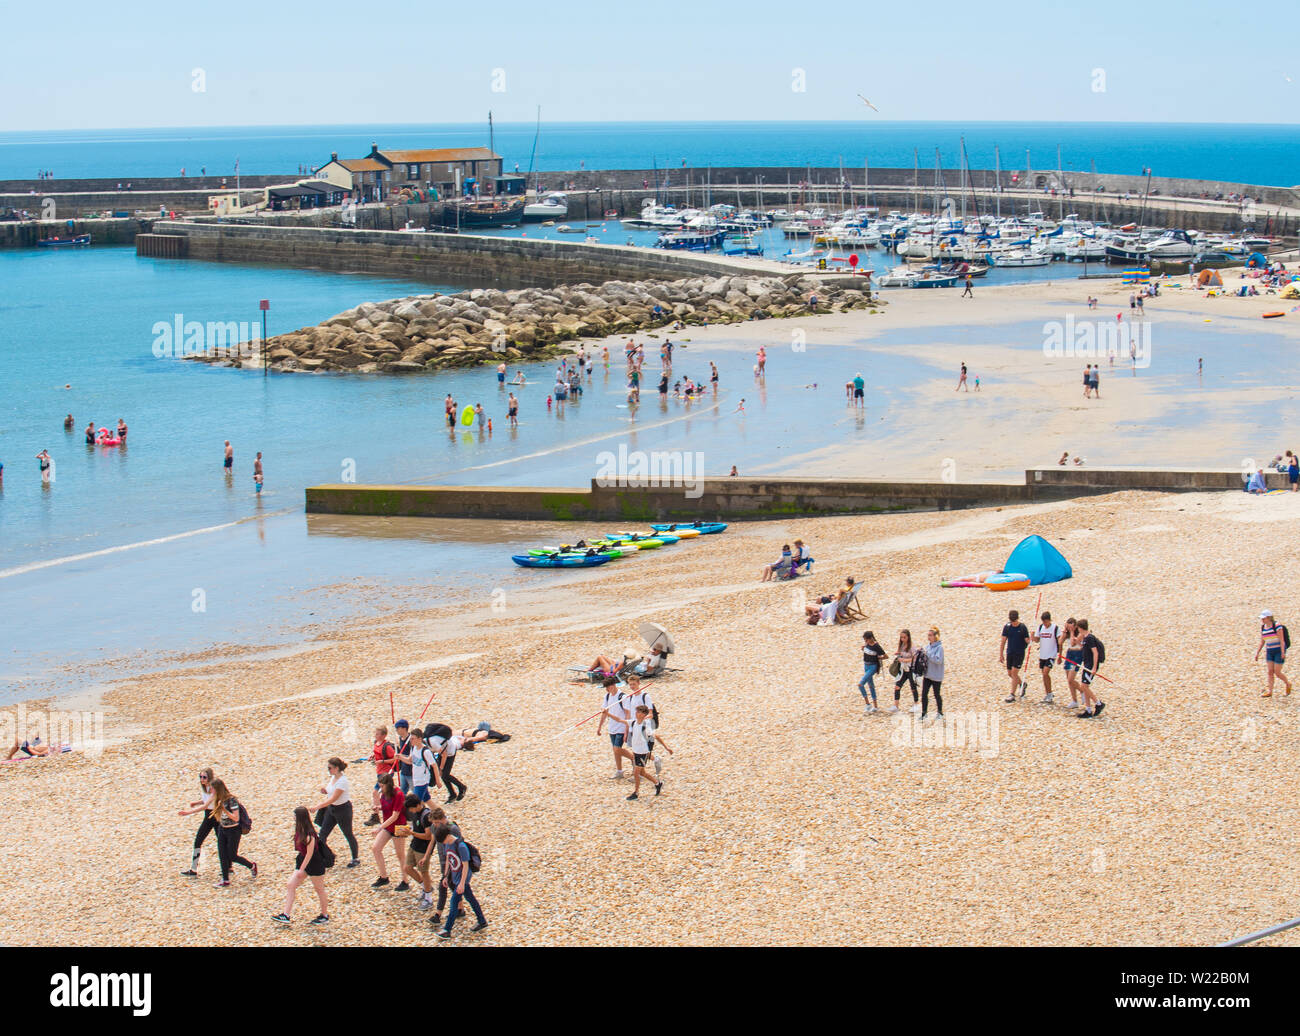 Lyme Regis, Dorset, UK. 4th July 2019. UK Weather: Sunbathers flock to the beach at the seaside resort of Lyme Regis to soak up scorching hot sunshine and blue skies ahead of the weekend. Credit: Celia McMahon/Alamy Live News. Stock Photo